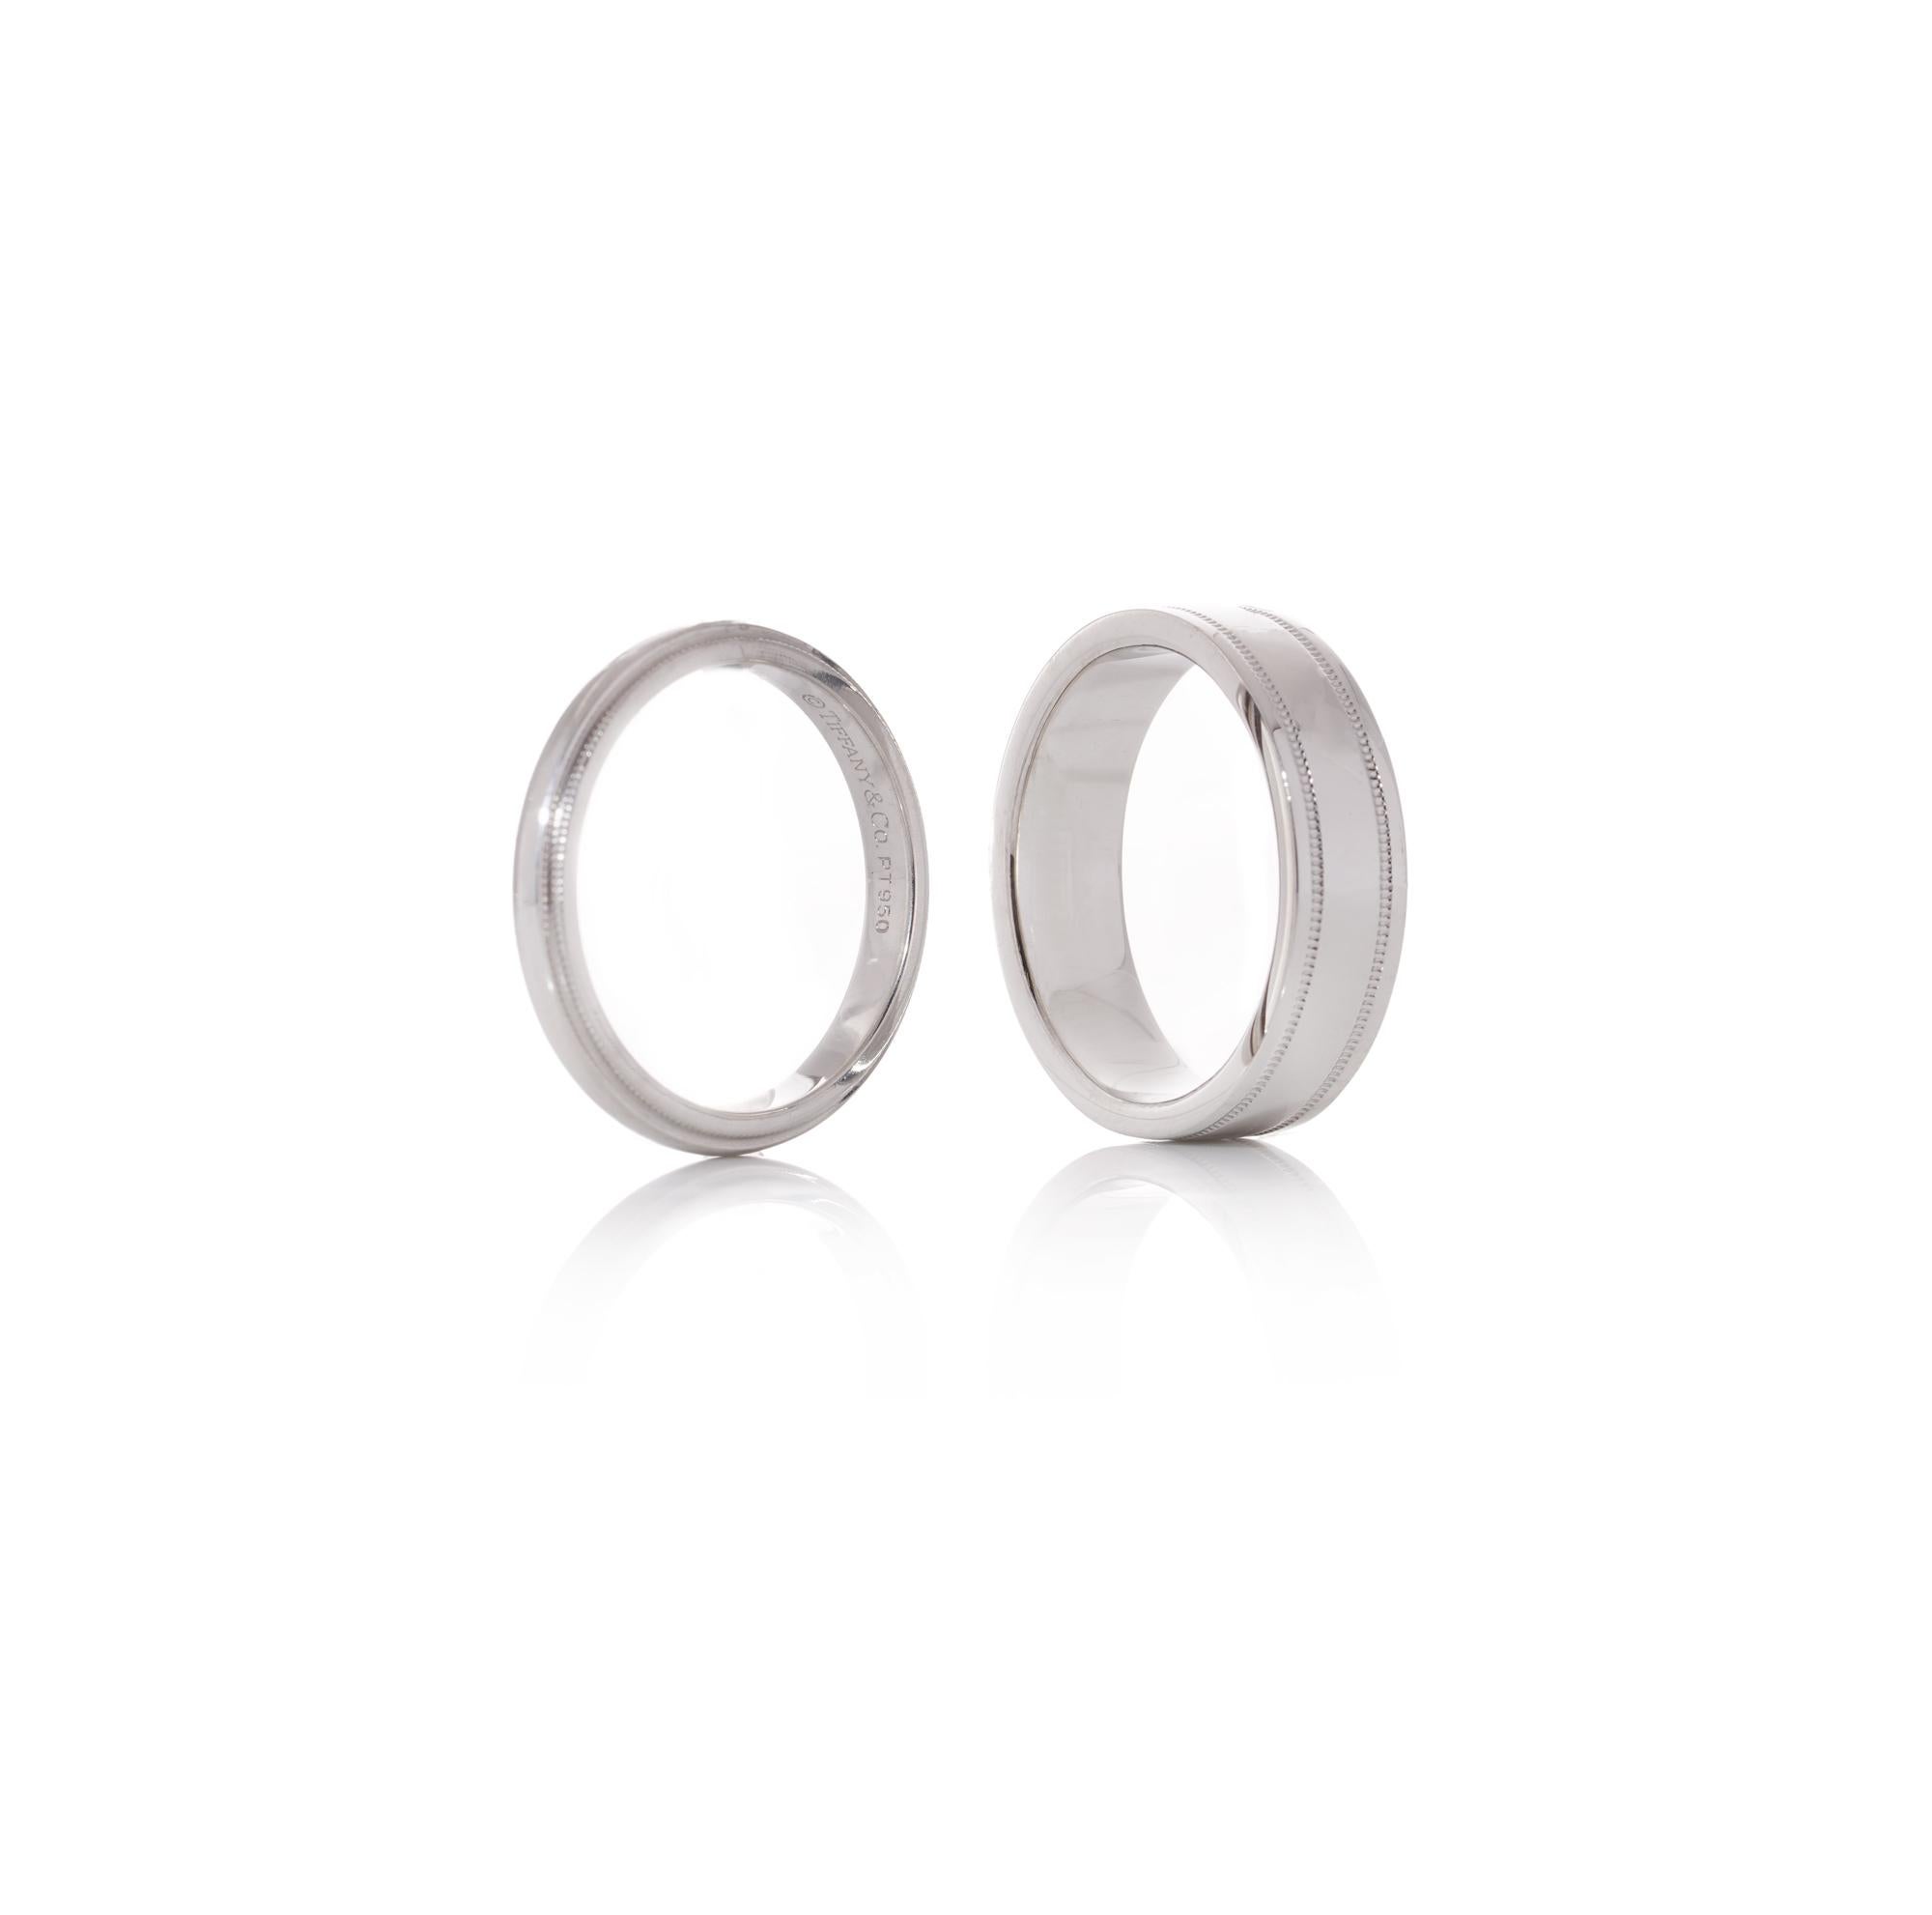 Tiffany & Co. presents a stunning pair of wedding ring bands crafted from 950 platinum, as part of the Tiffany Together collection. These exquisite bands are meticulously hallmarked with the Tiffany & Co. 950 Platinum mark, ensuring their